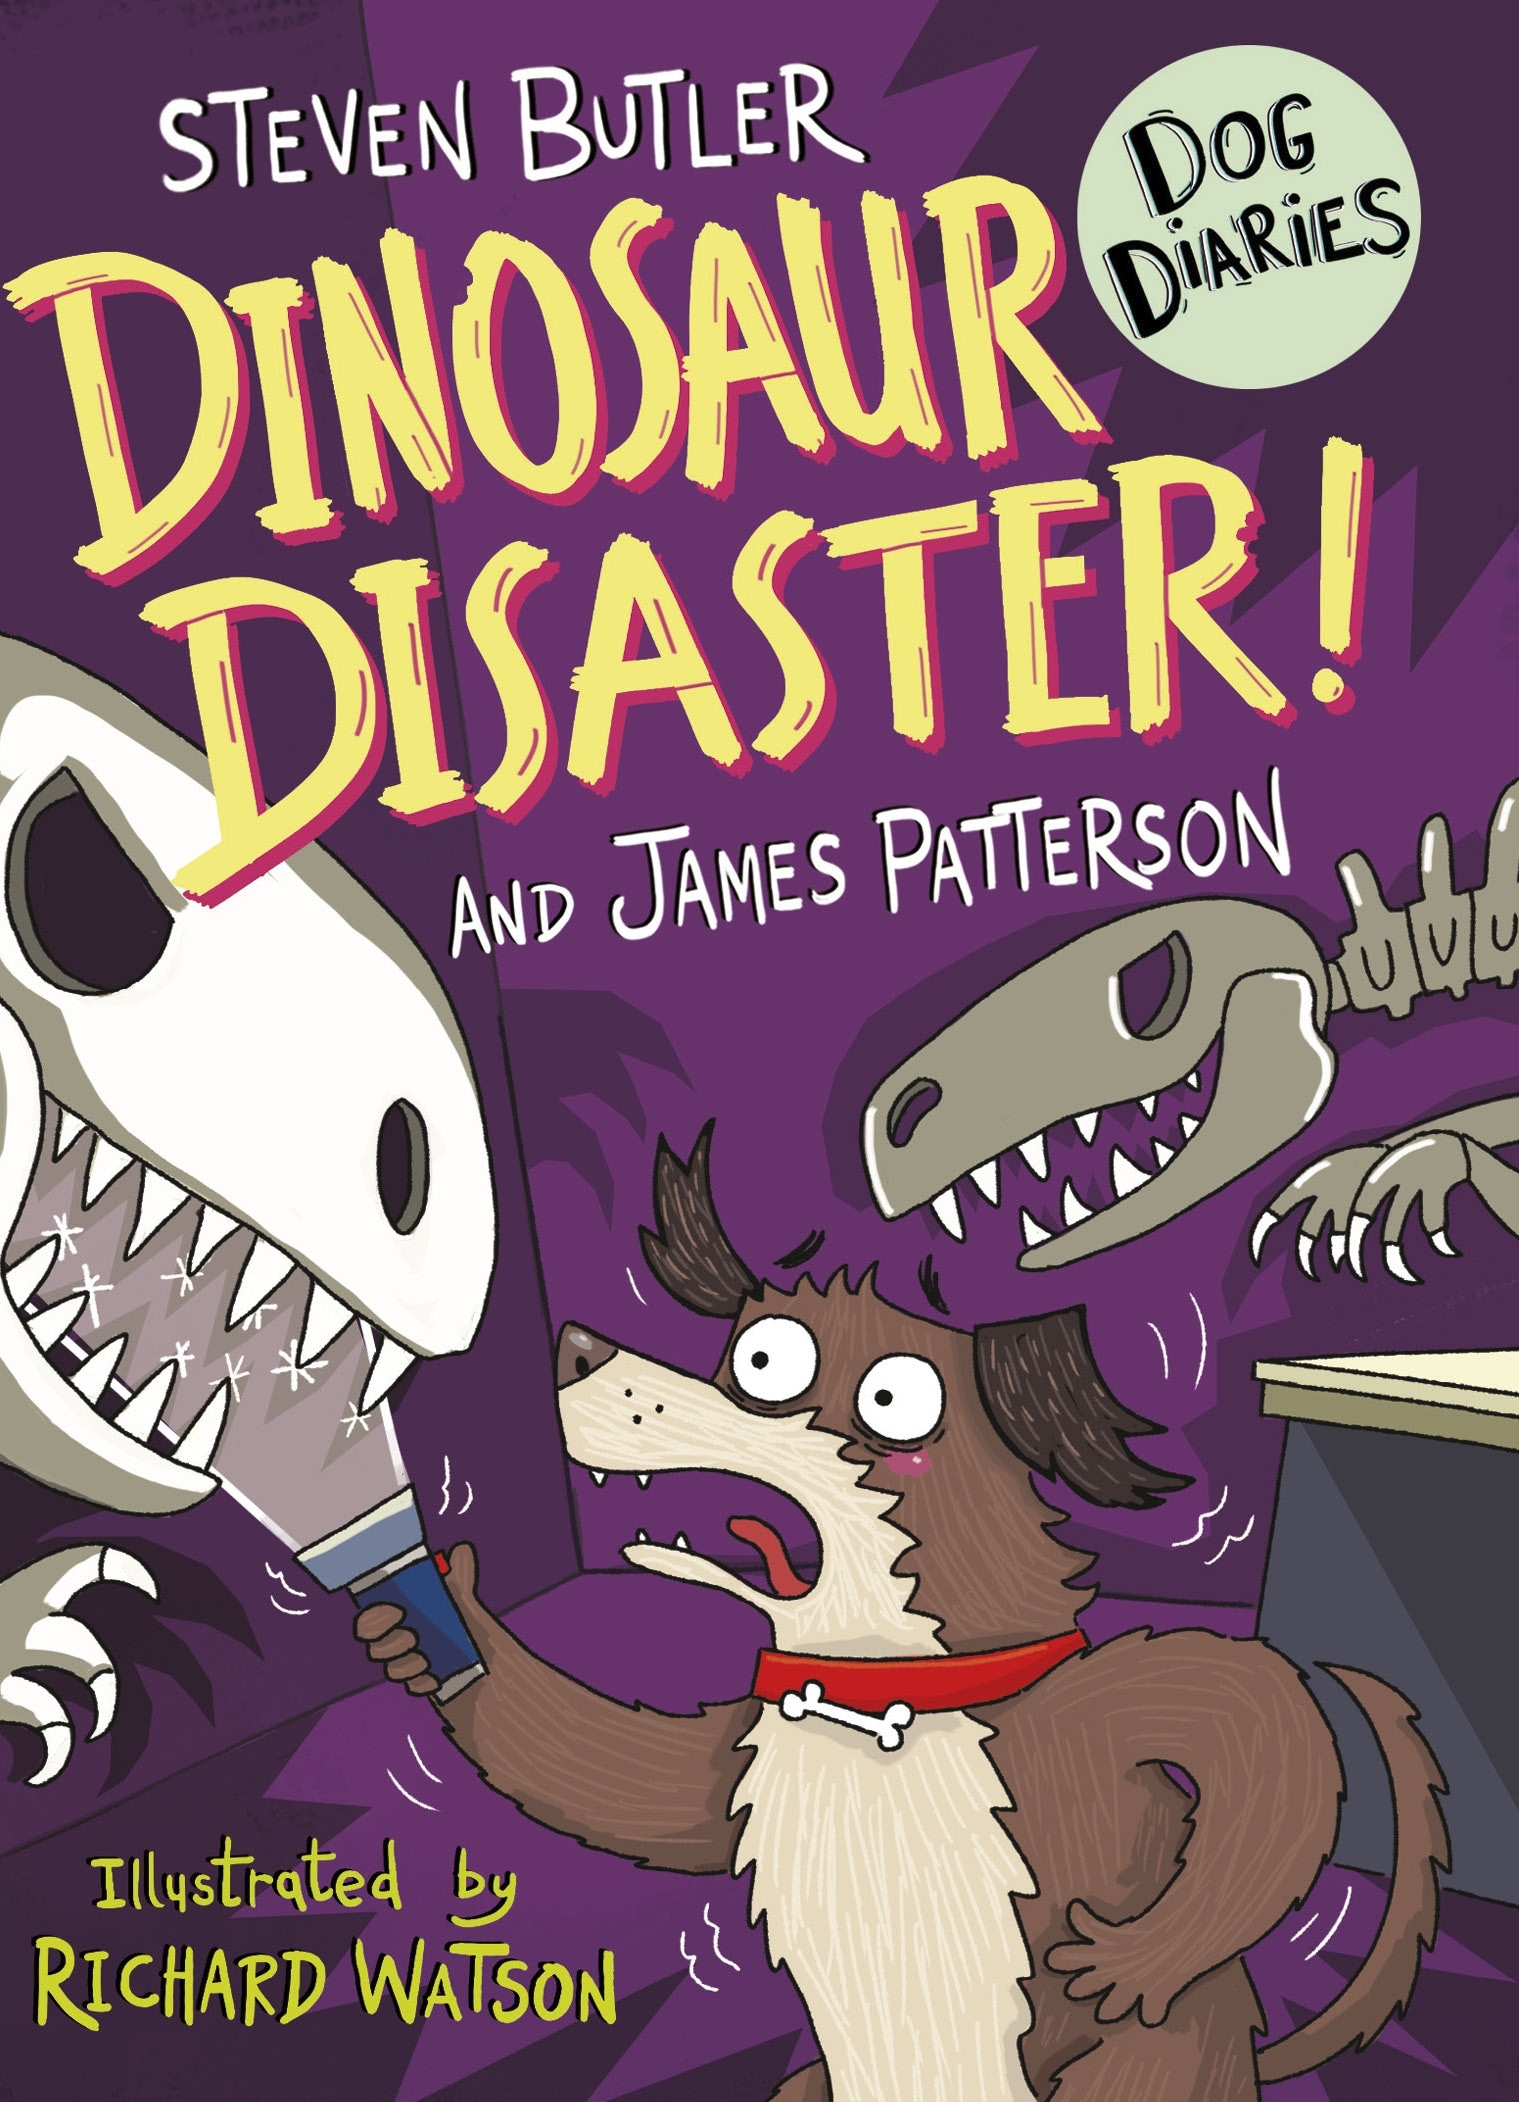 Book “Dog Diaries: Dinosaur Disaster!” by Steven Butler, James Patterson